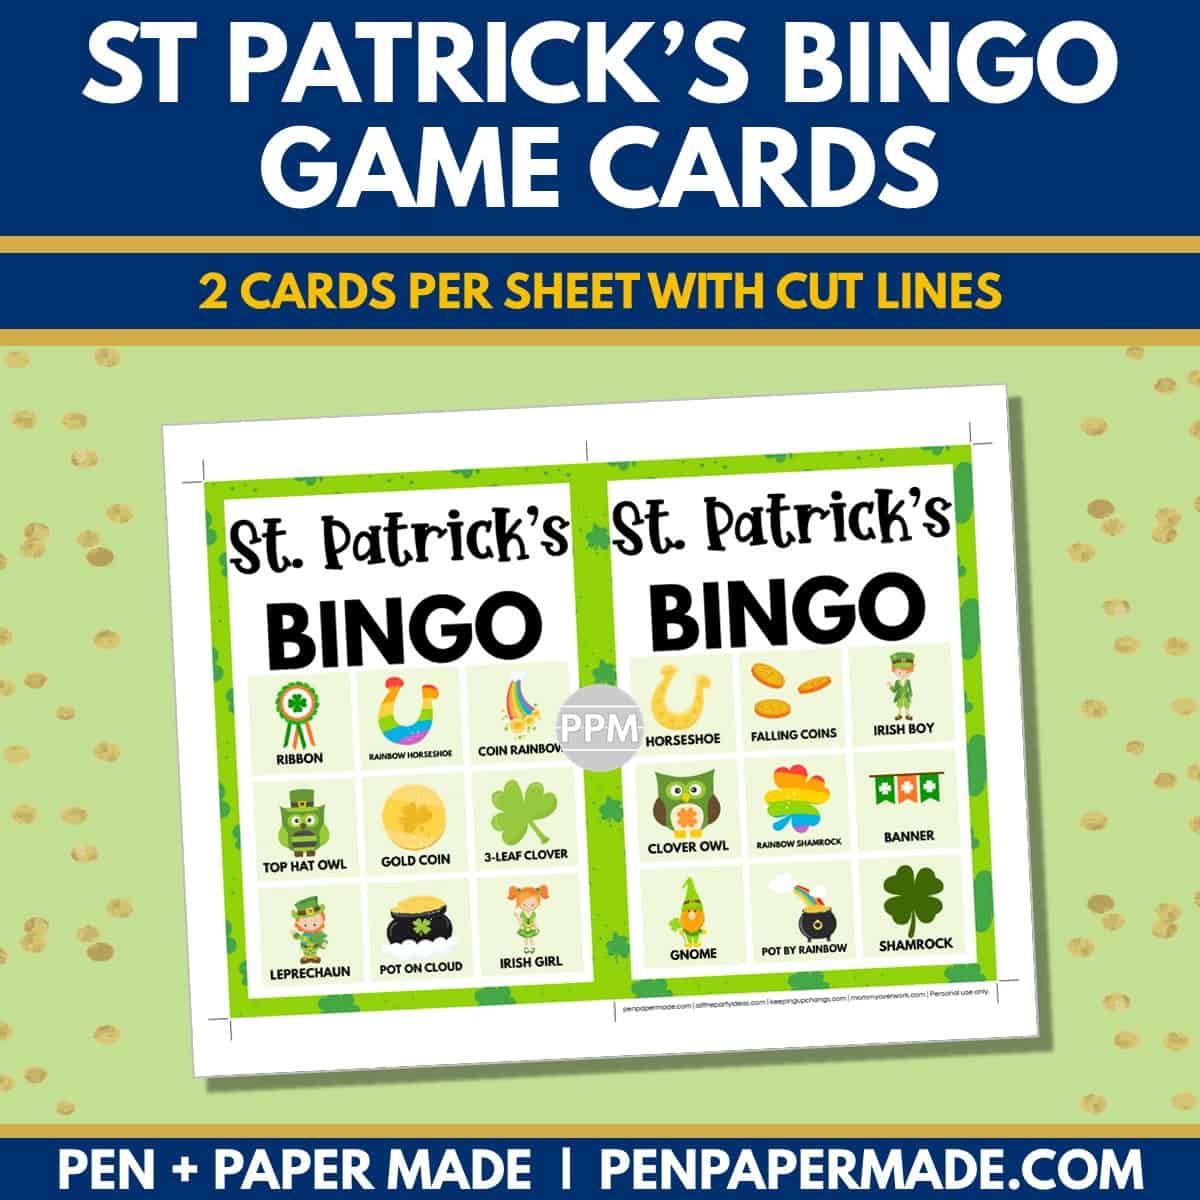 st. patrick's day bingo card 3x3 5x7 game boards with images and text words.